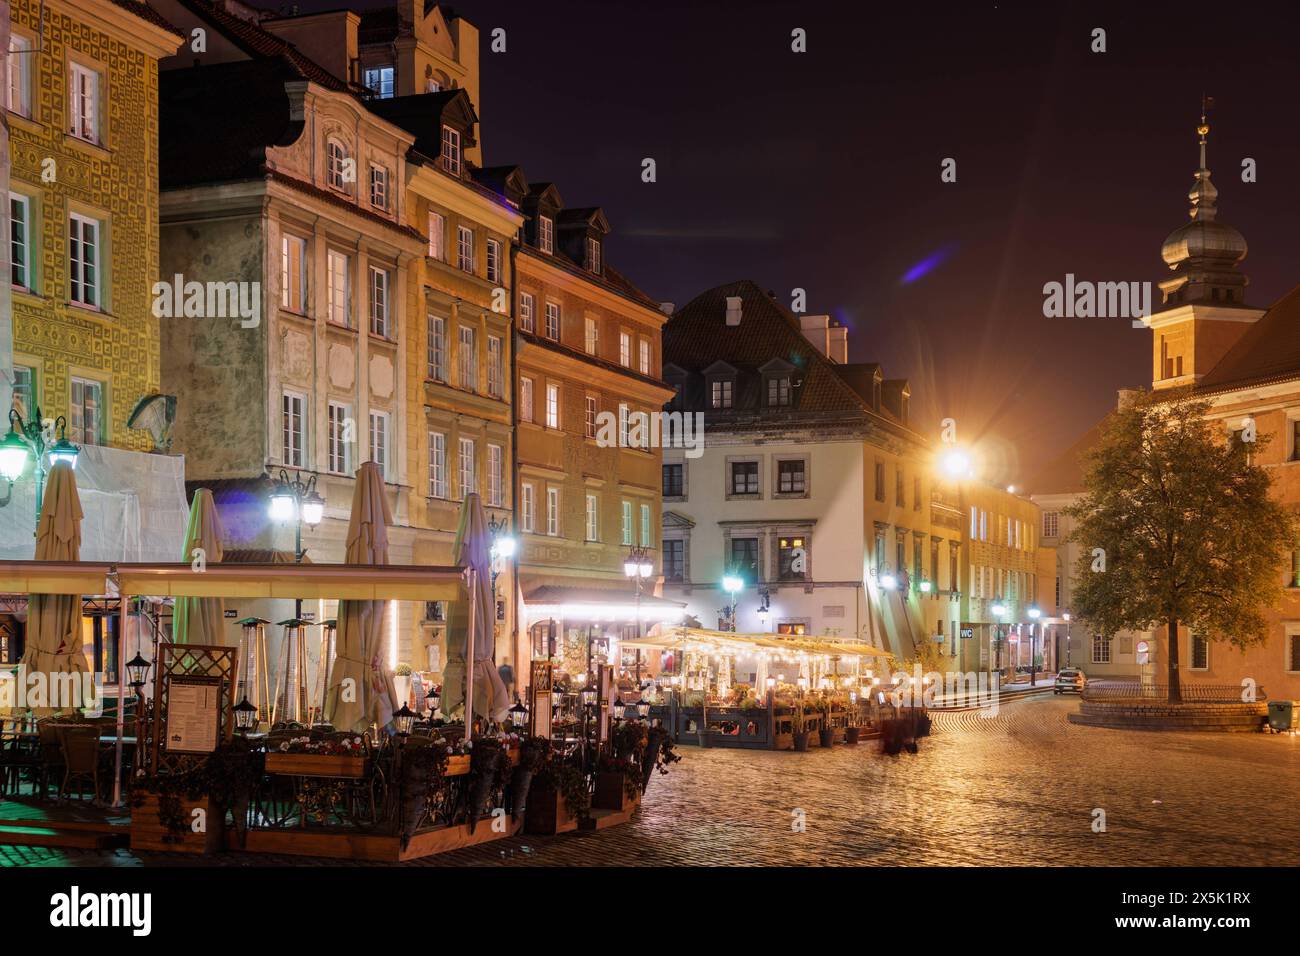 Castle Square Plac Zamkowy at night with outdoor seating restaurants around traditional low-rise buildings, Old Town, Warsaw, Poland, Europe Copyright Stock Photo